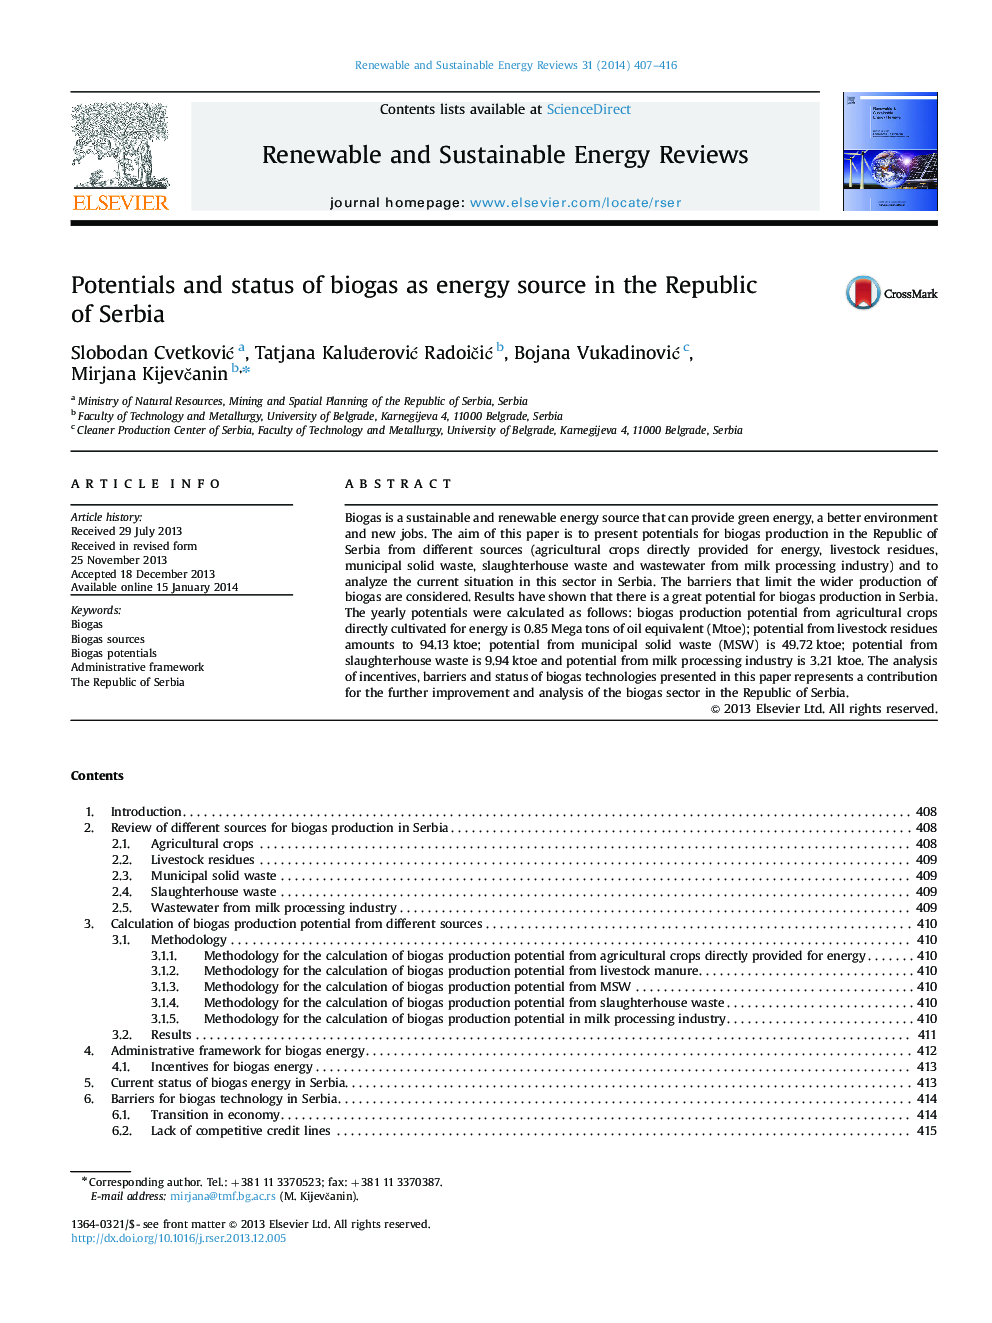 Potentials and status of biogas as energy source in the Republic of Serbia